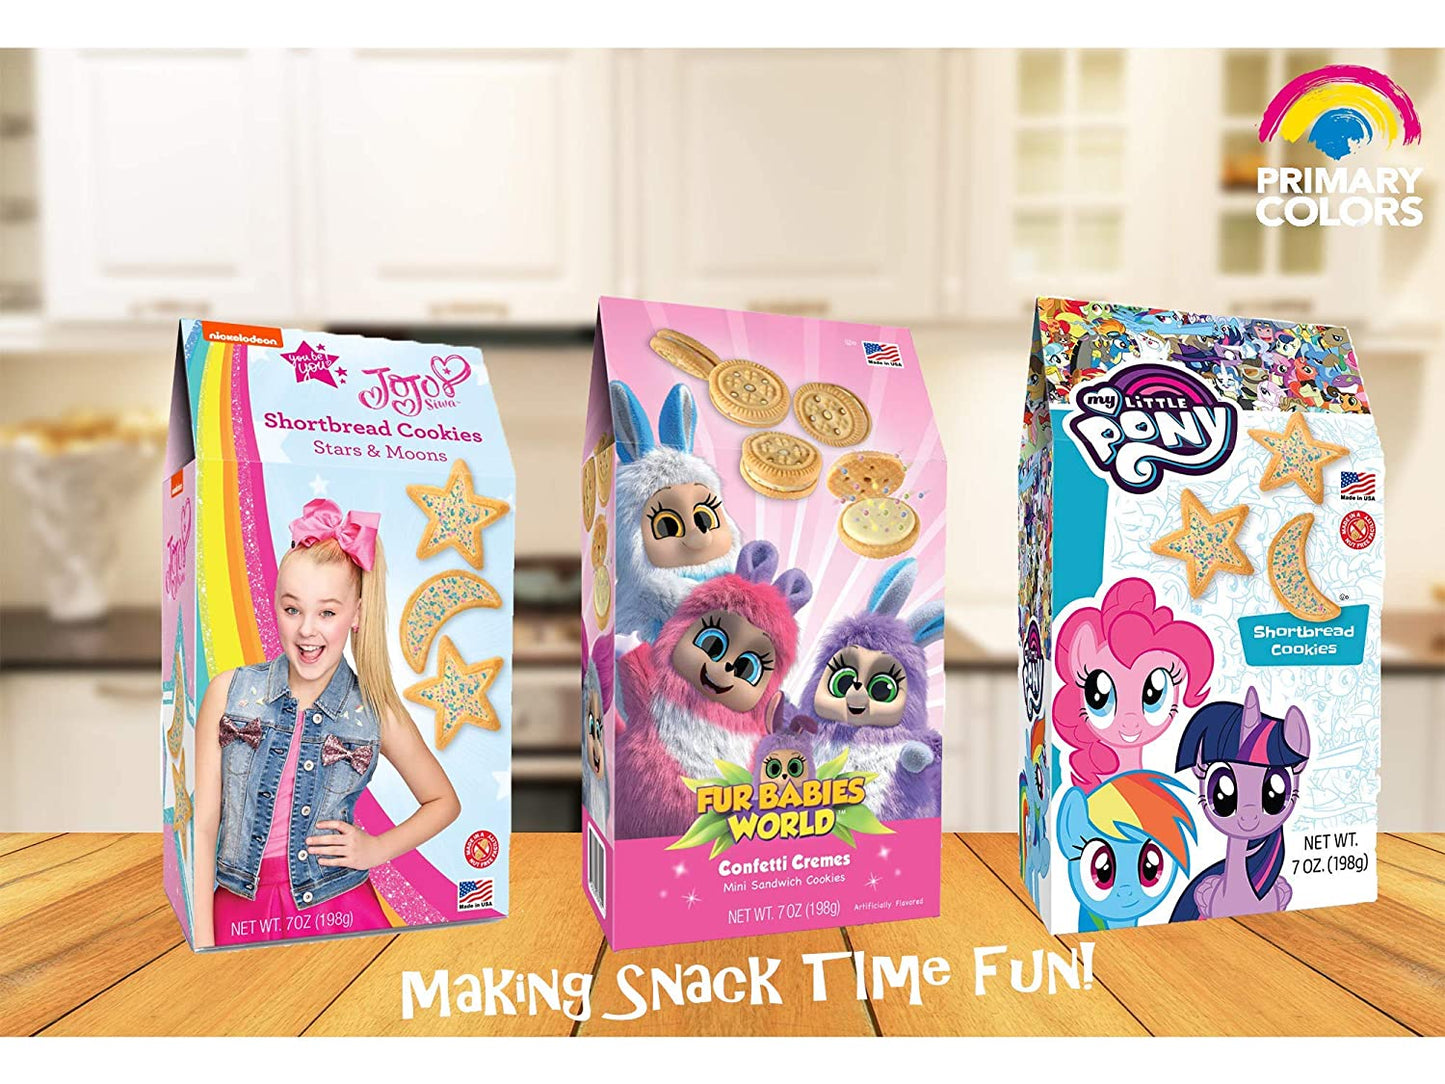 My Little Pony Stars and Moons With Sprinkles Shortbread Cookies Cuboid Box (Kosher)